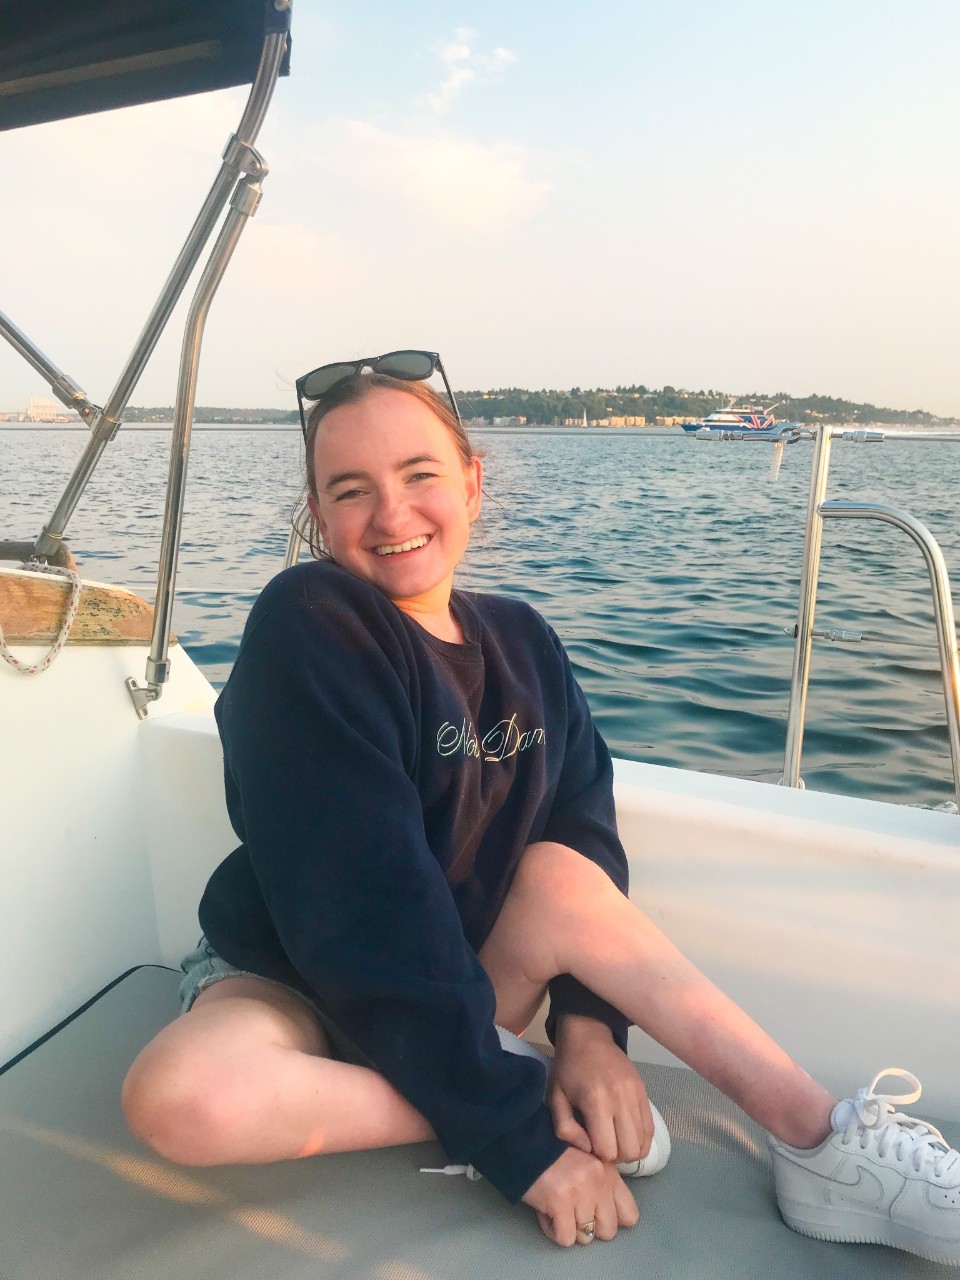 Rosie took a sailing excursion in Seattle, Washington. She is shown sitting on the bench of a boat, smiling with the ocean behind her. She is in a navy sweatshirt, has her hair pulled back into a ponytail, is wearing sunglasses on the top of her head, and shorts with white sneakers.